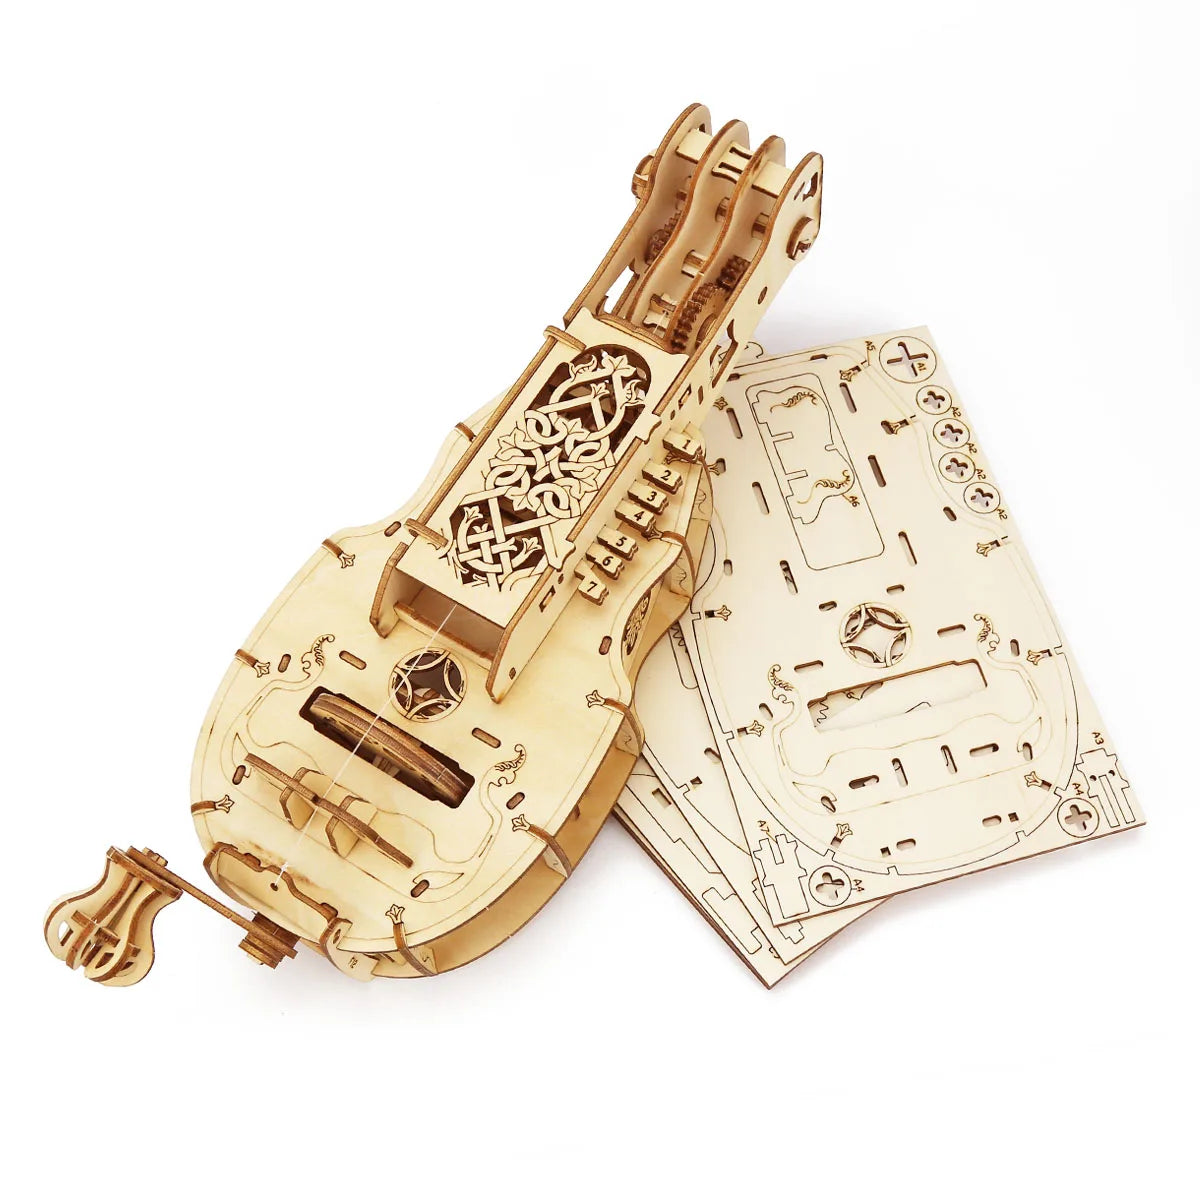 Build Your Own Hurdy Gurdy Mechanical Musical Instrument 3D Wooden Puzzle - ToylandEU